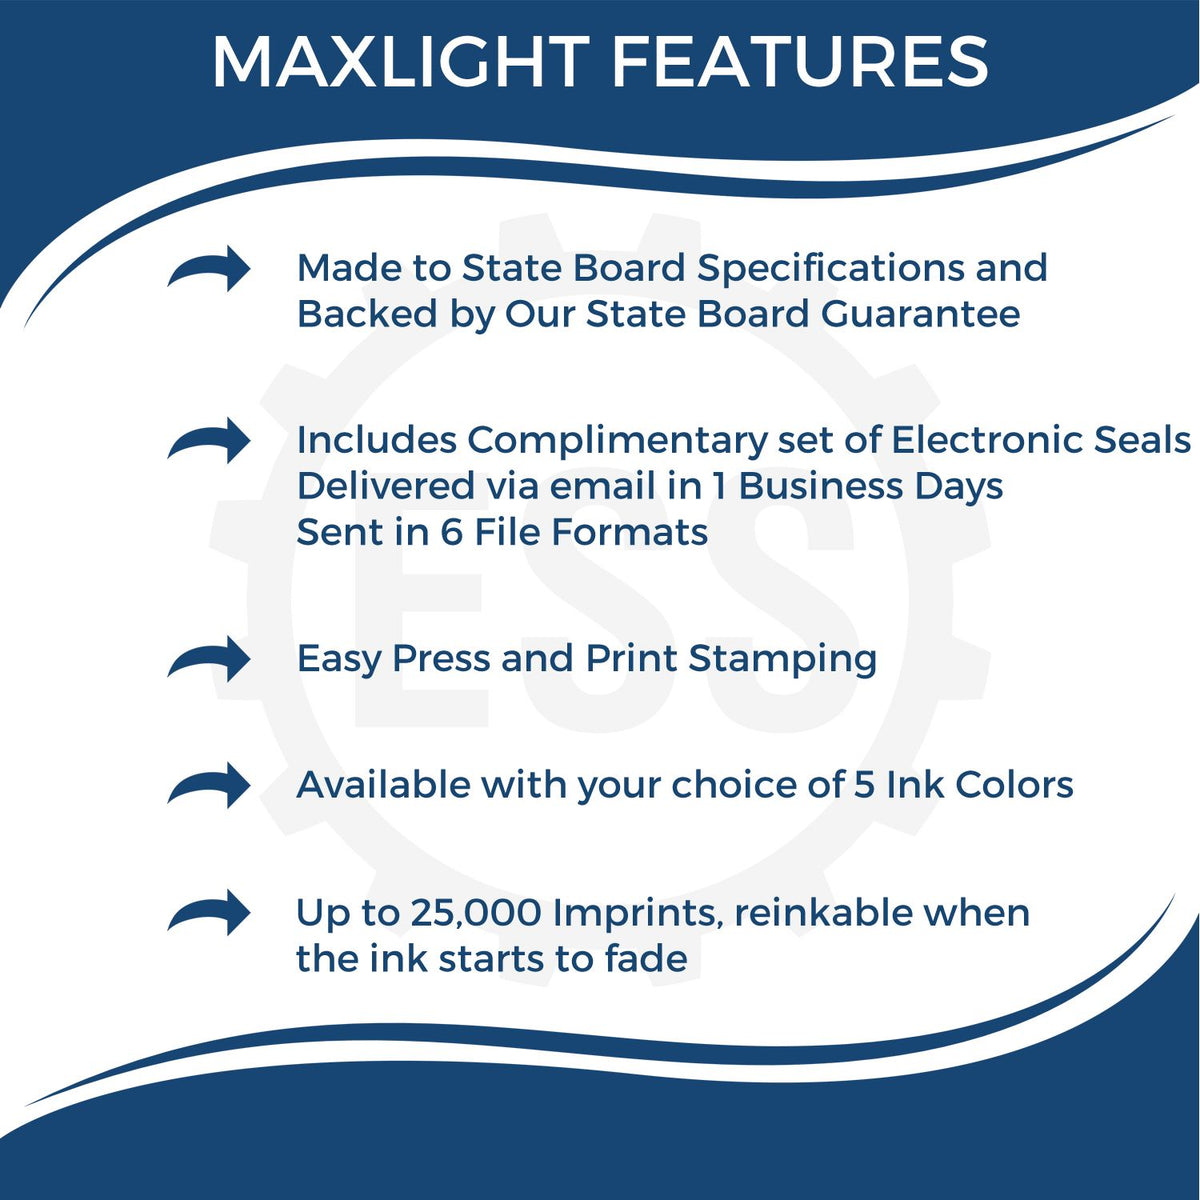 A picture of an infographic highlighting the selling points for the Premium MaxLight Pre-Inked New Jersey Engineering Stamp